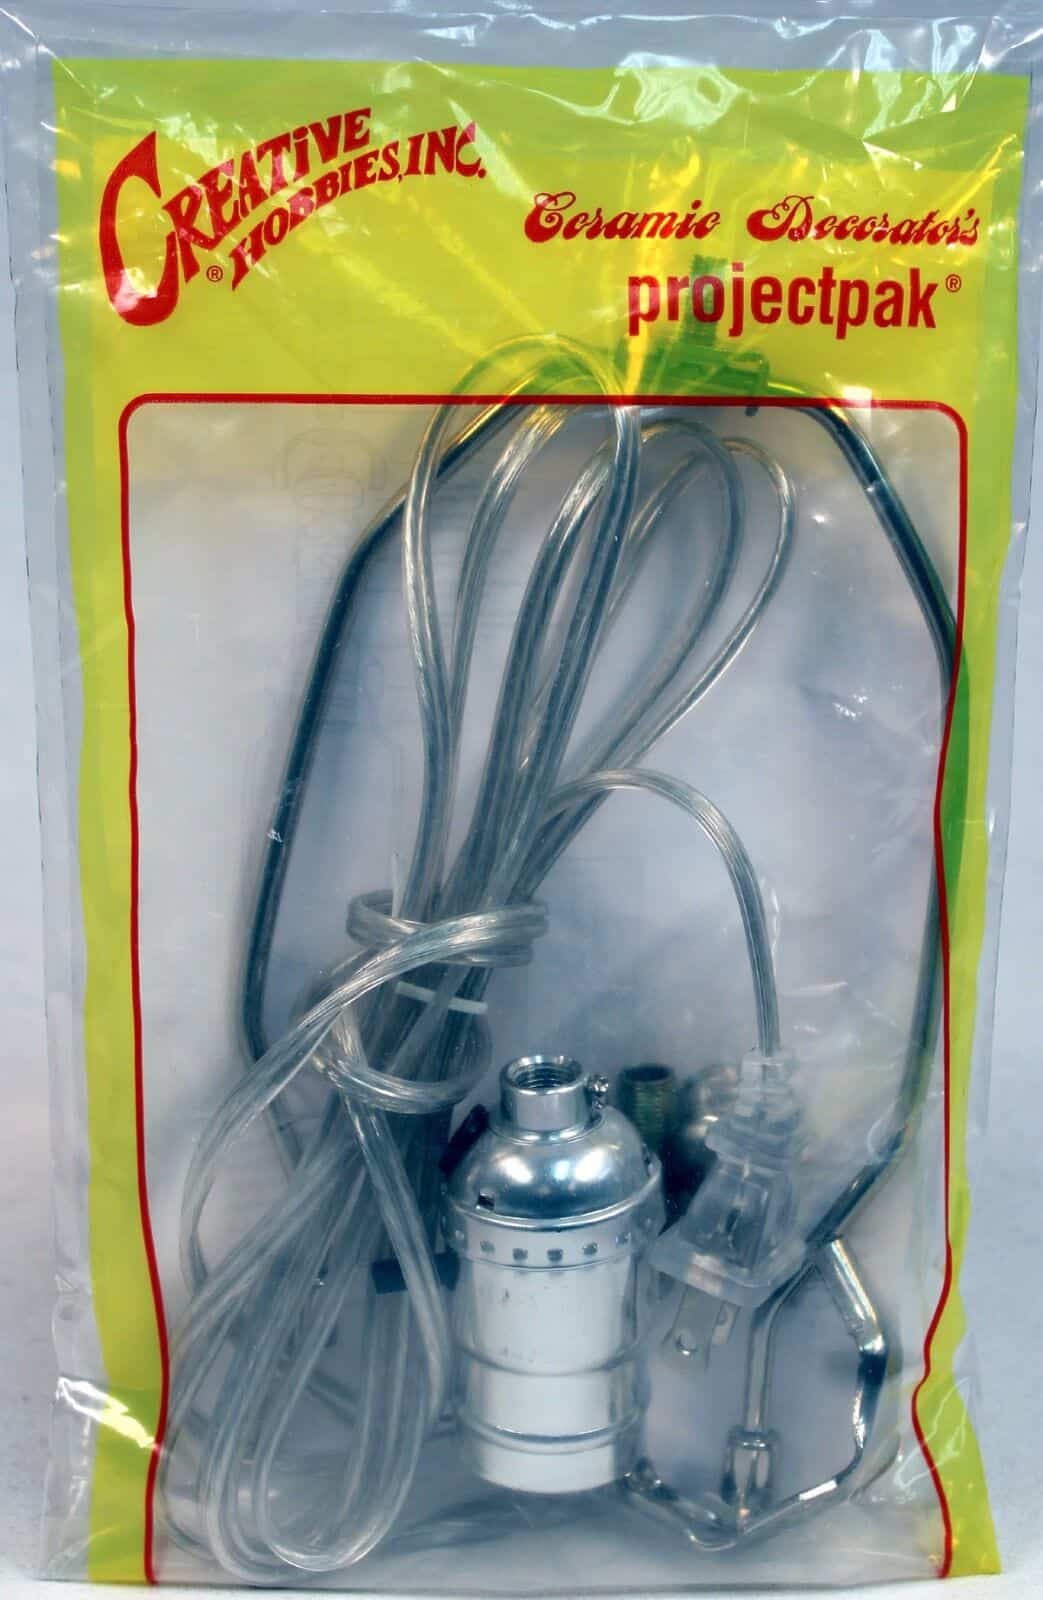 A plastic bag with a silver object.